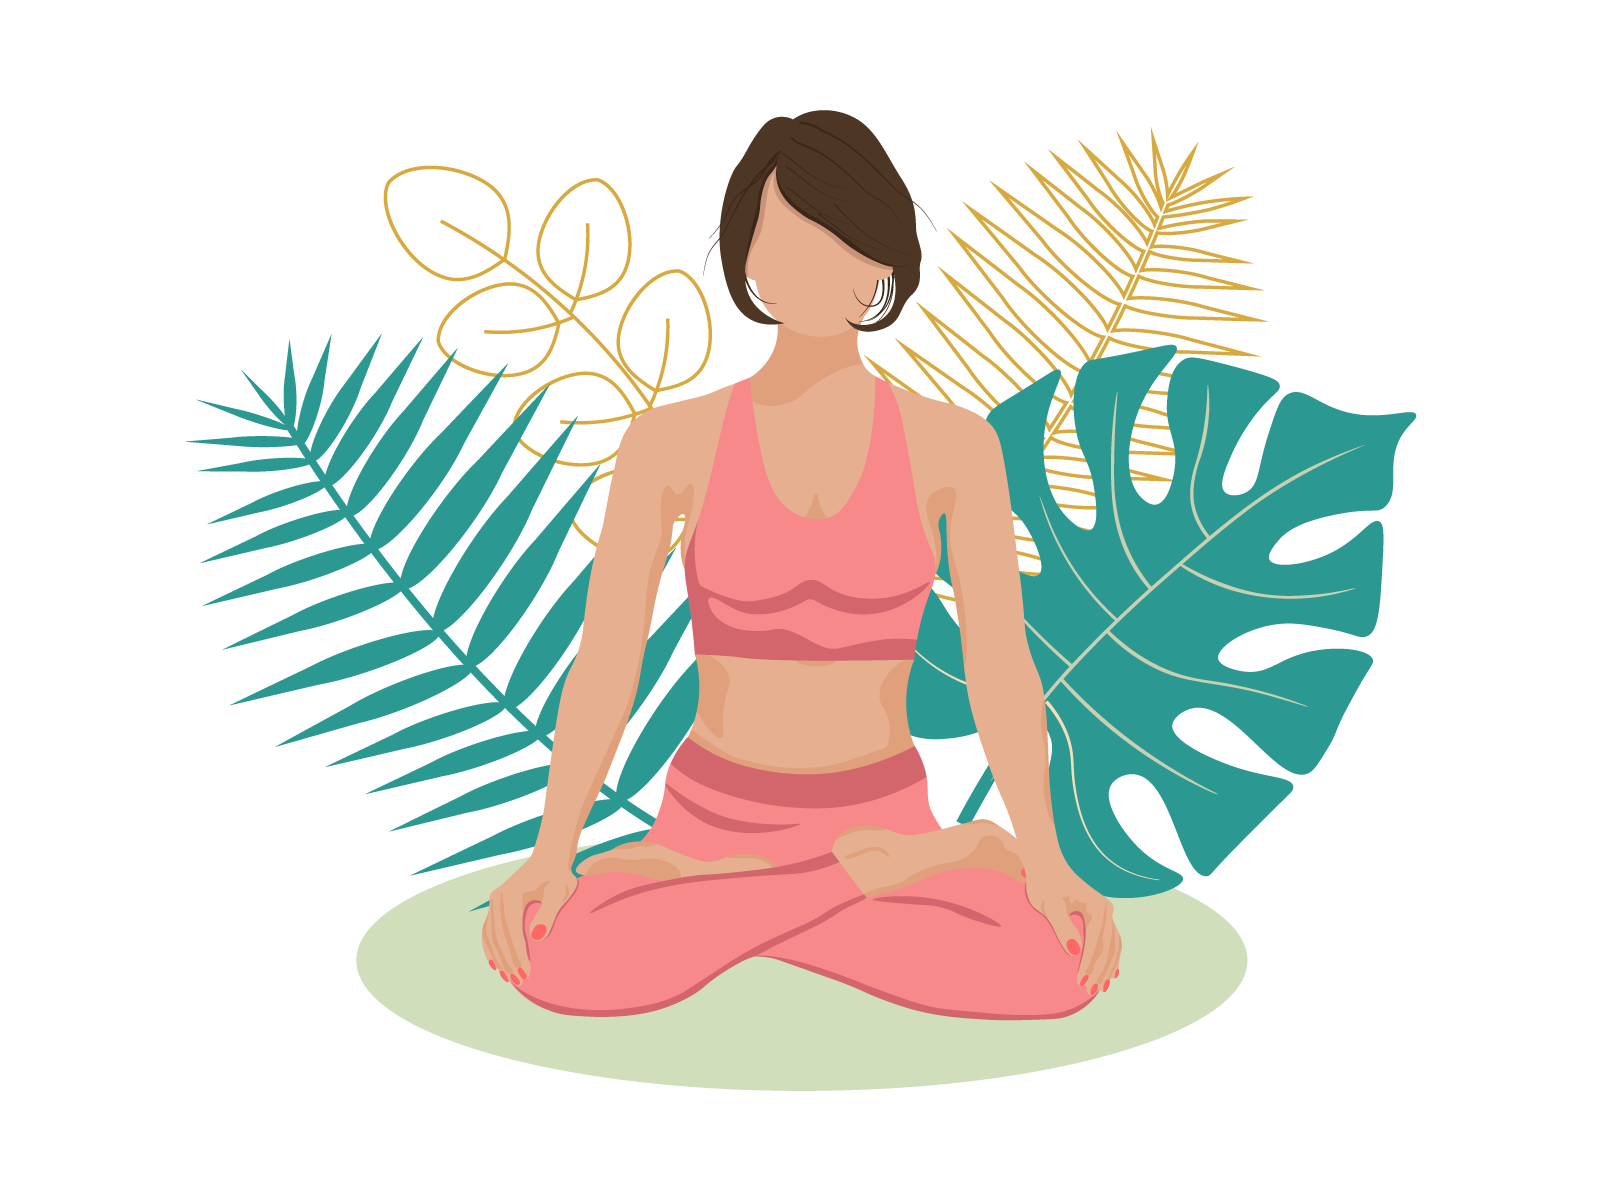 Faceless Vector Woman Meditating, Yoga Lotus Pose in Nature by Alez Design  on Dribbble